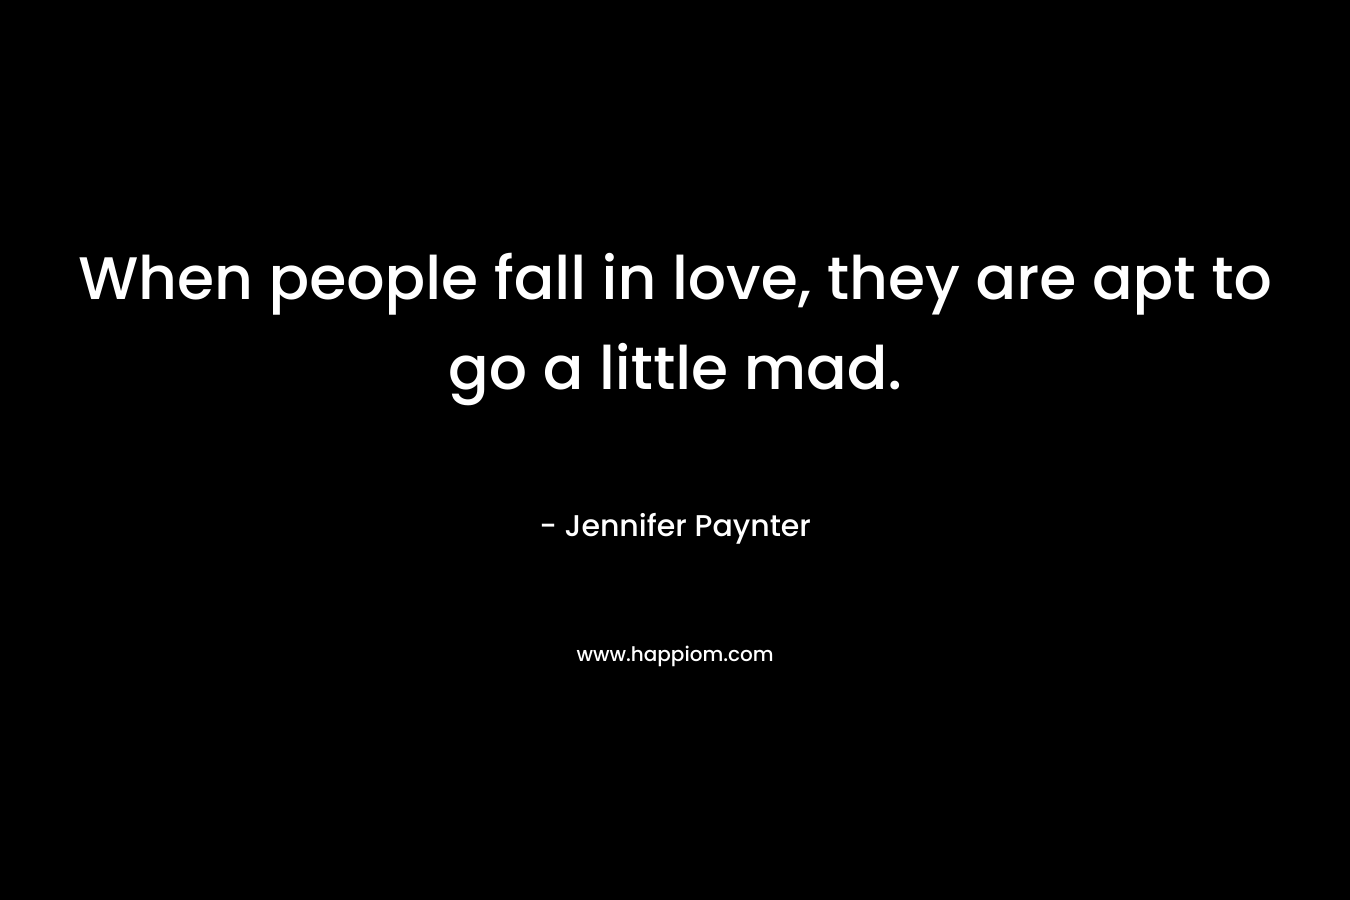 When people fall in love, they are apt to go a little mad. – Jennifer Paynter